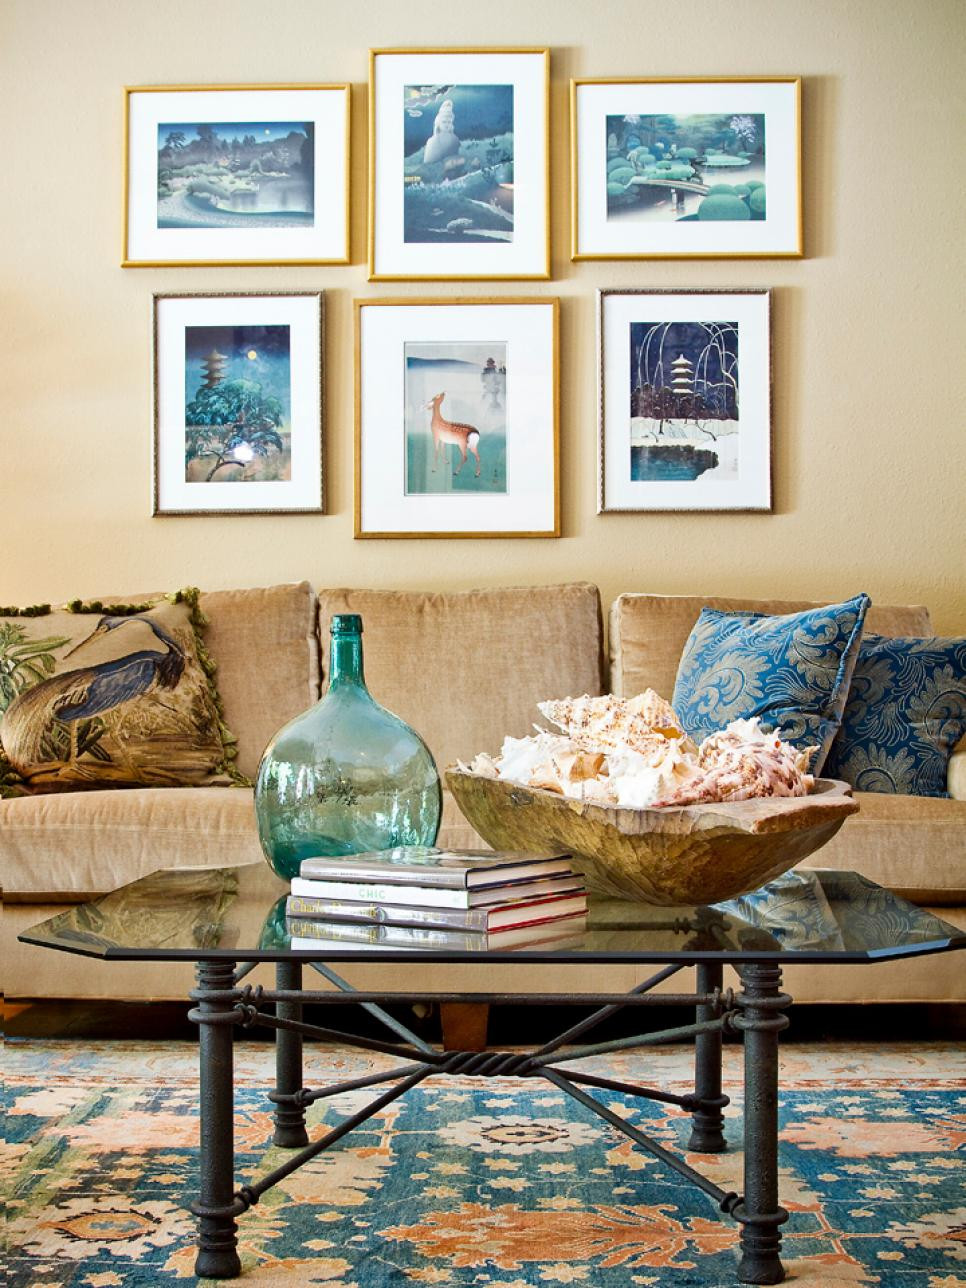 Coastal Living Room Decor
 Coastal Living Rooms That Will Make You Yearn for the Beach